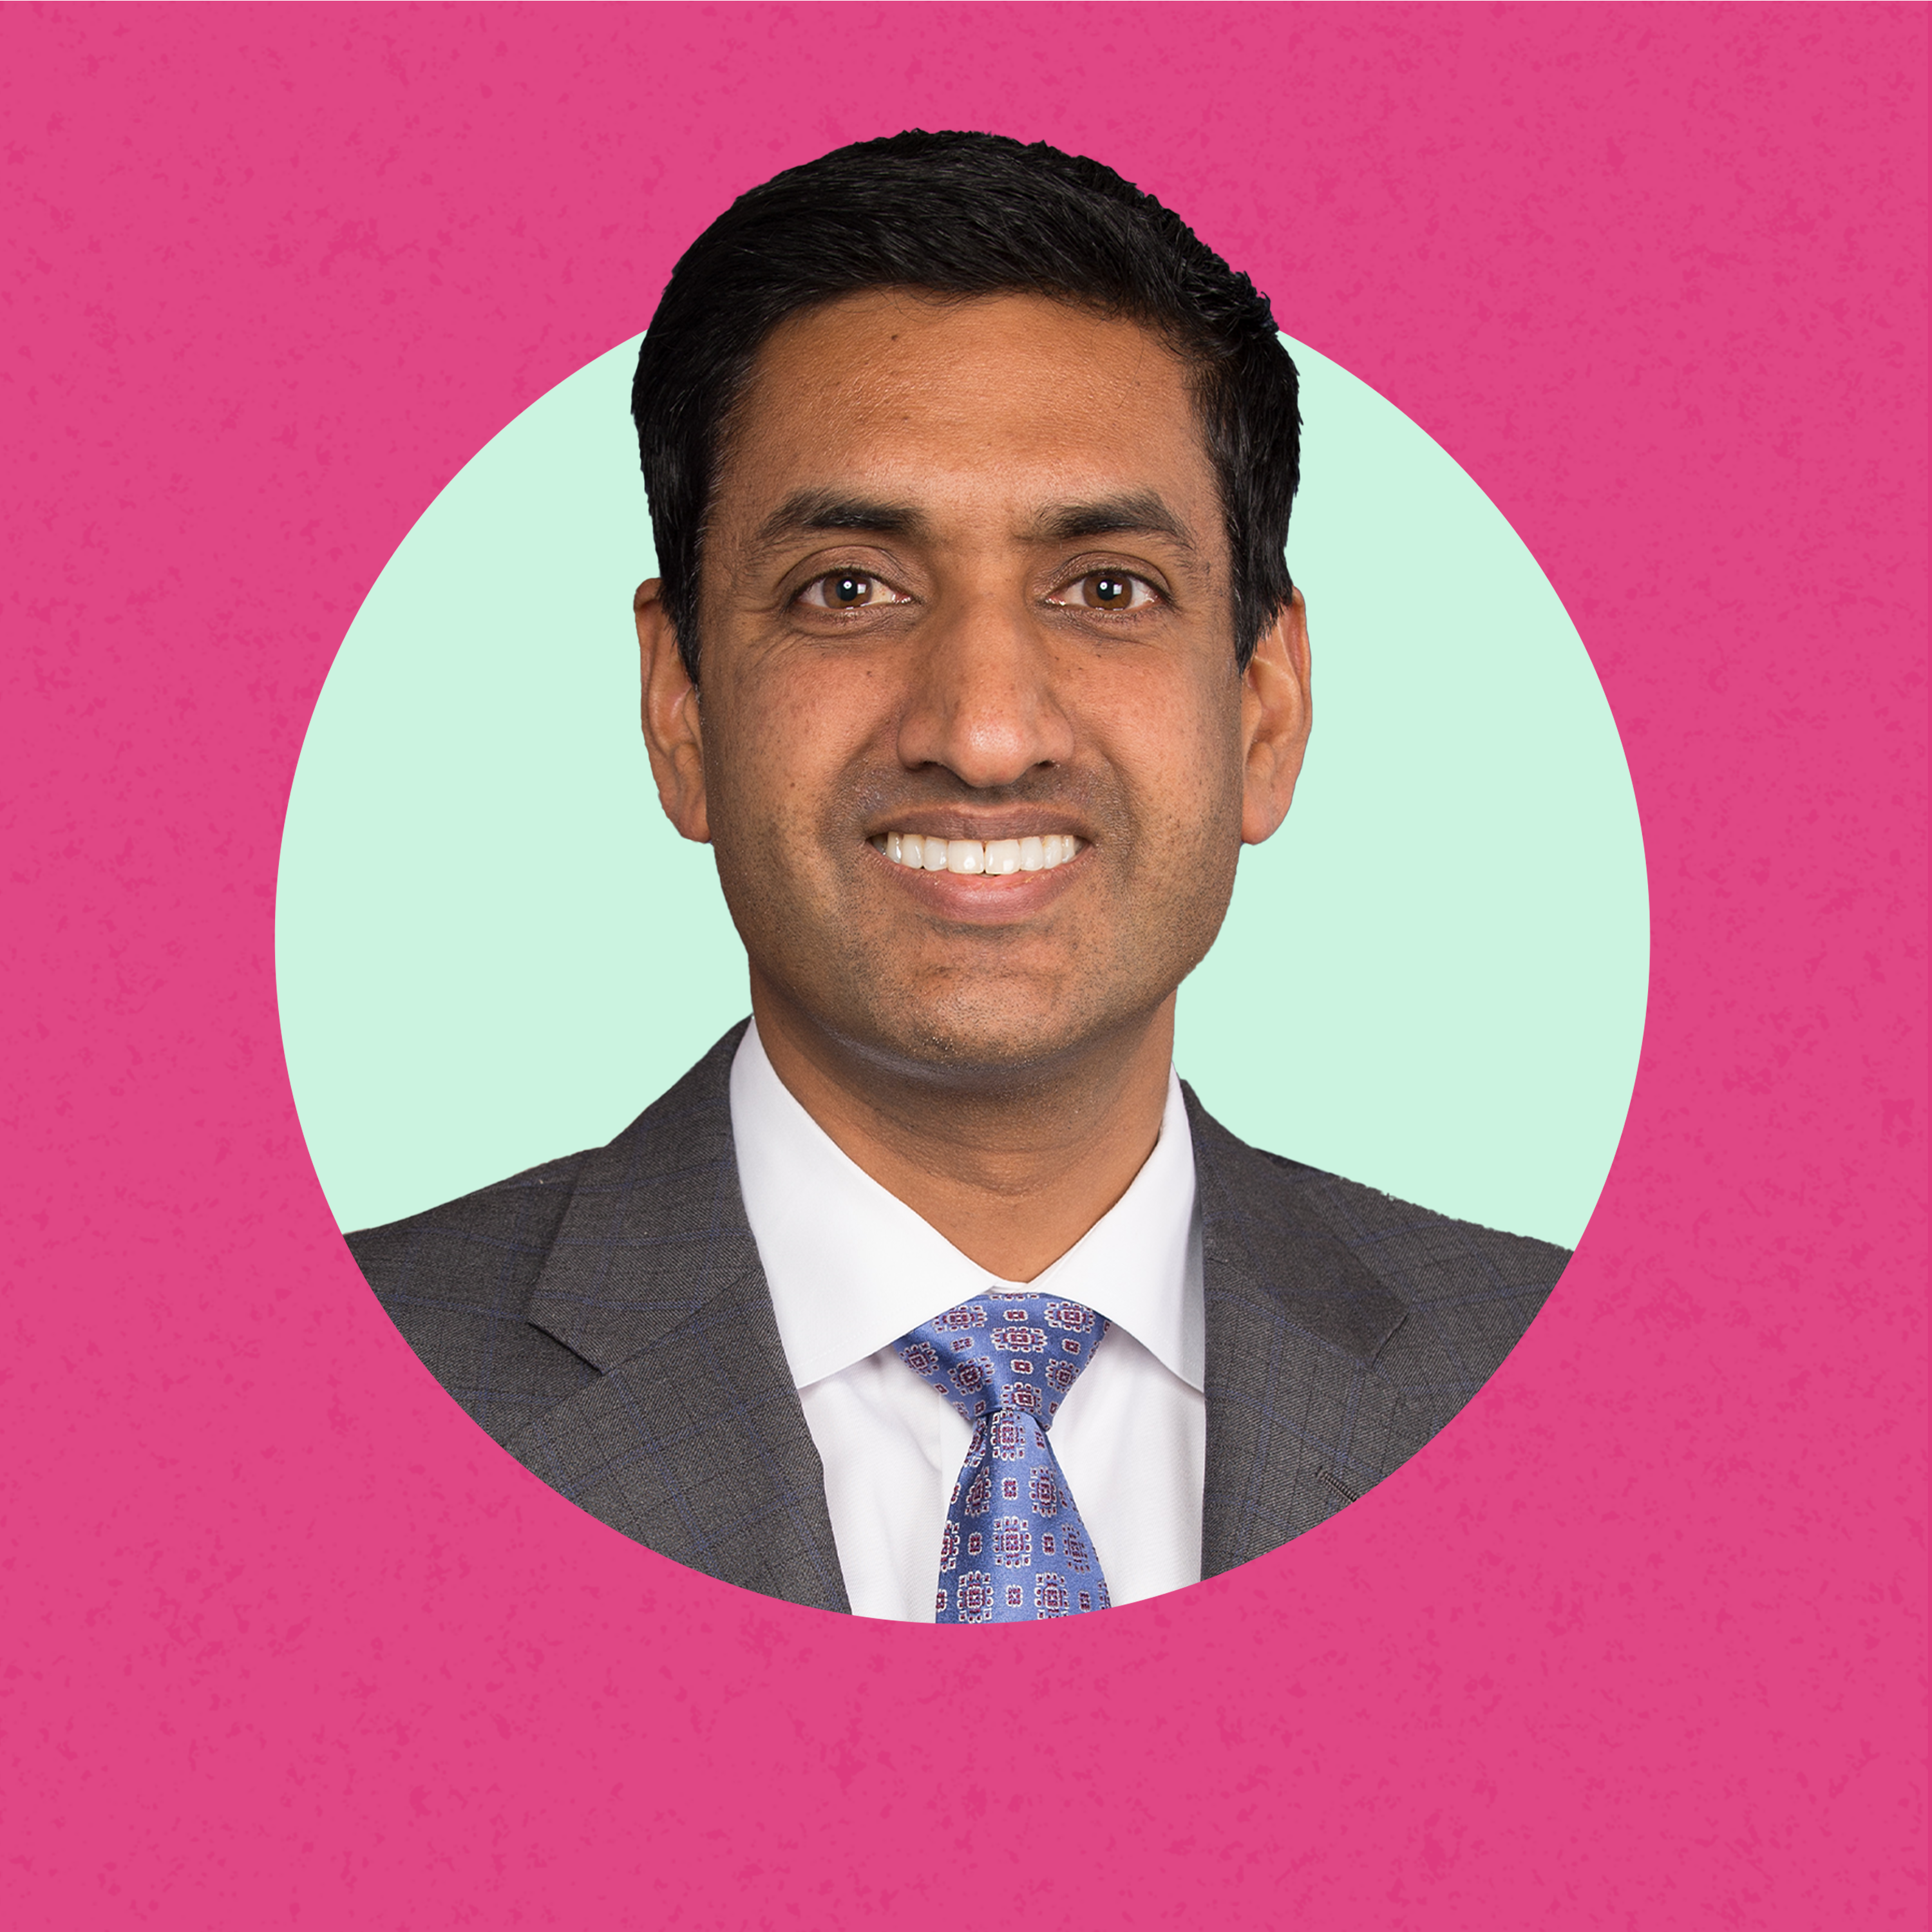 Vote in the House of Representatives or Keep Talking to Sam? (with Rep. Ro Khanna)